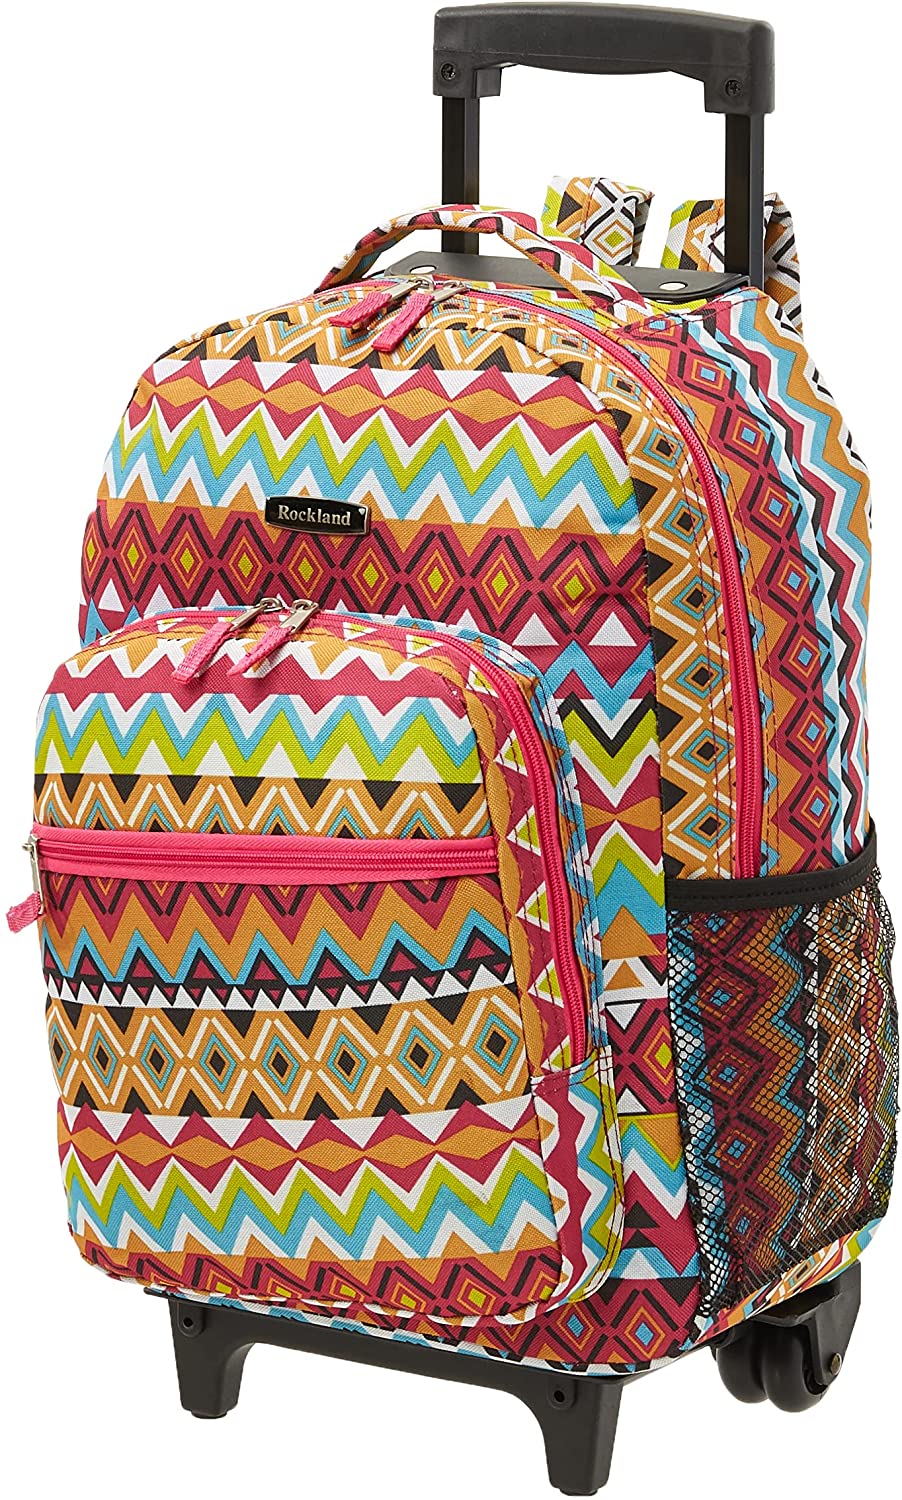 Double Handle Rolling Backpack, 17-Inch